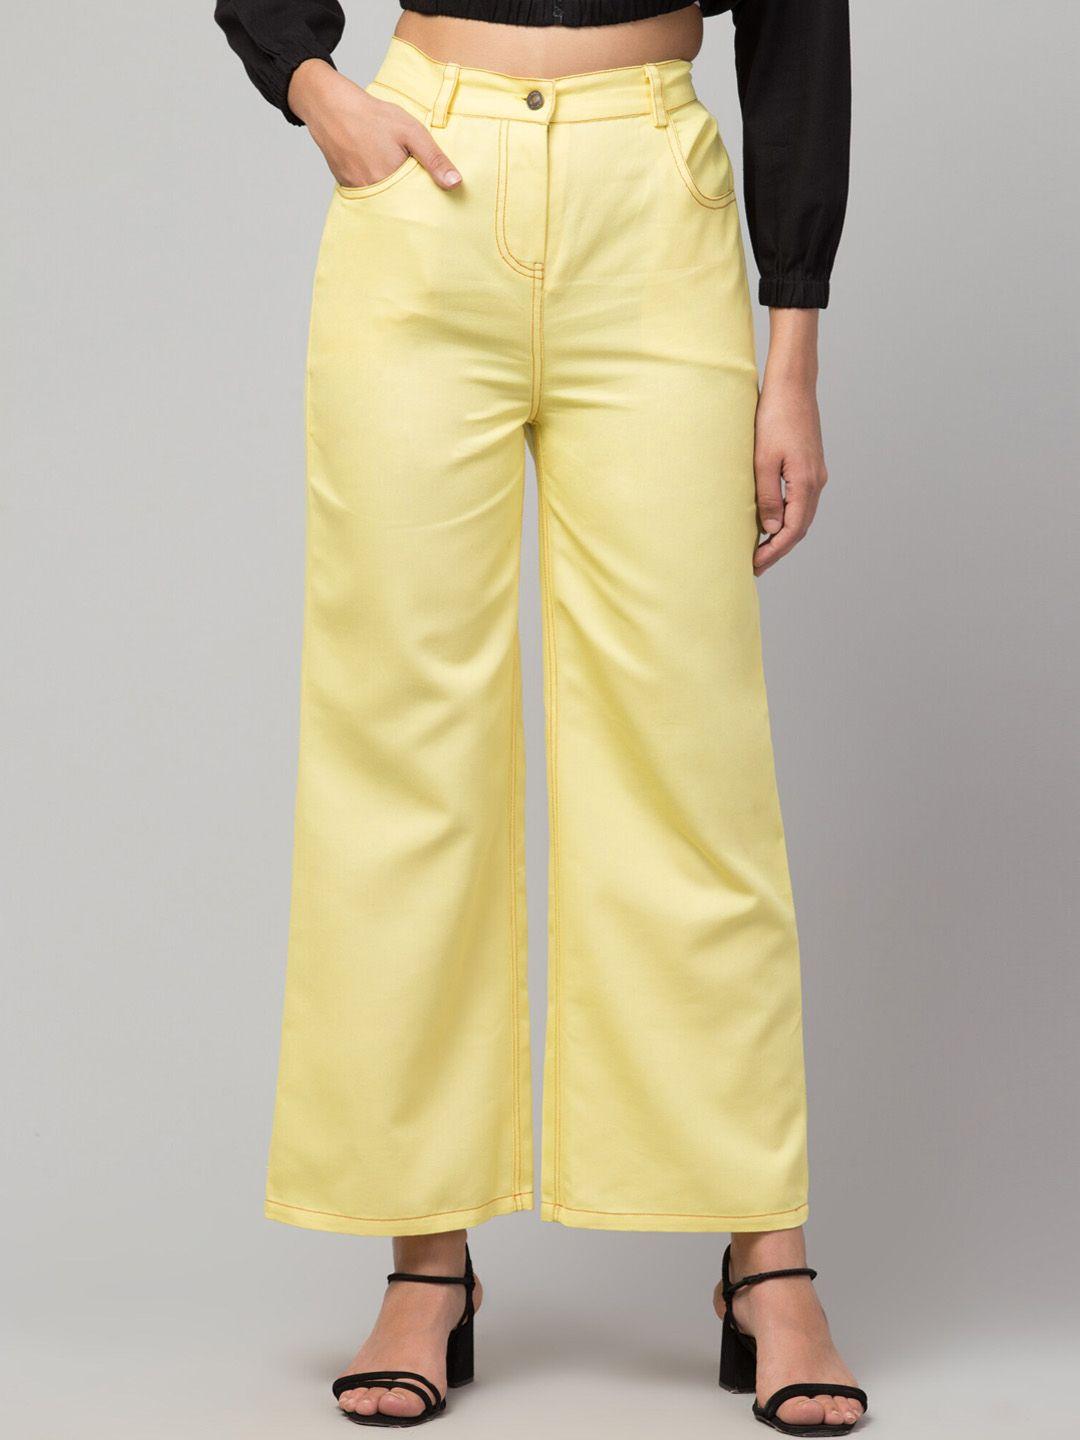 orchid hues women yellow high-rise jeans